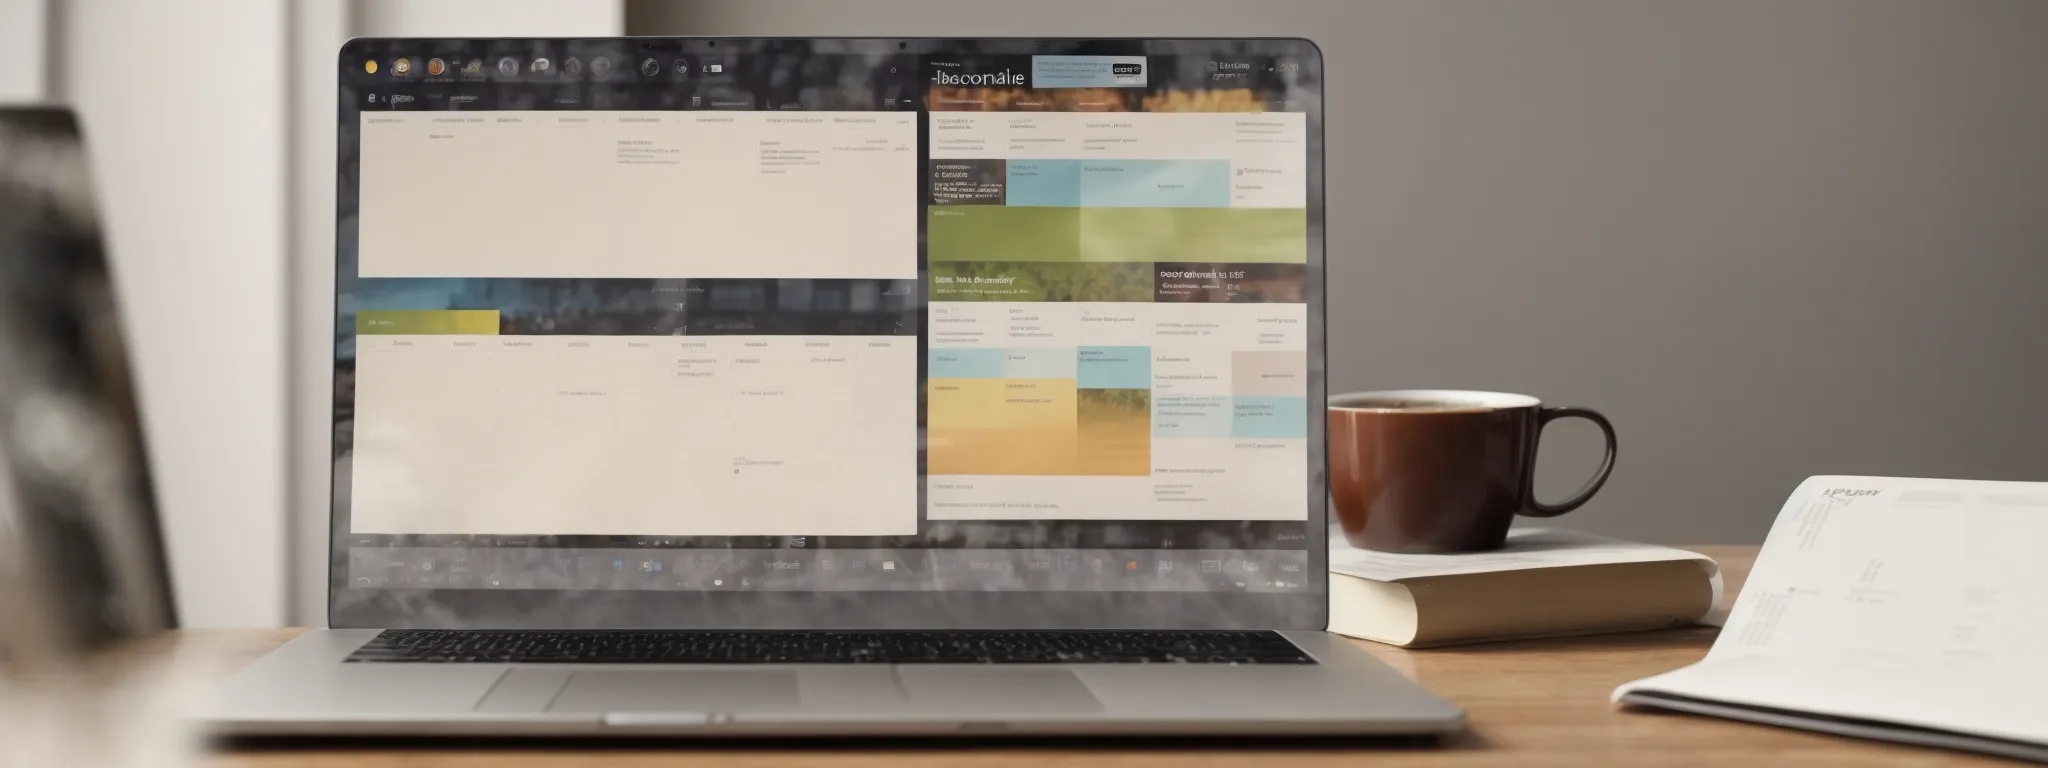 a laptop with an open calendar application displays a schedule filled with topic deadlines, flanked by seo books and a steaming cup of coffee on a minimalist desk.